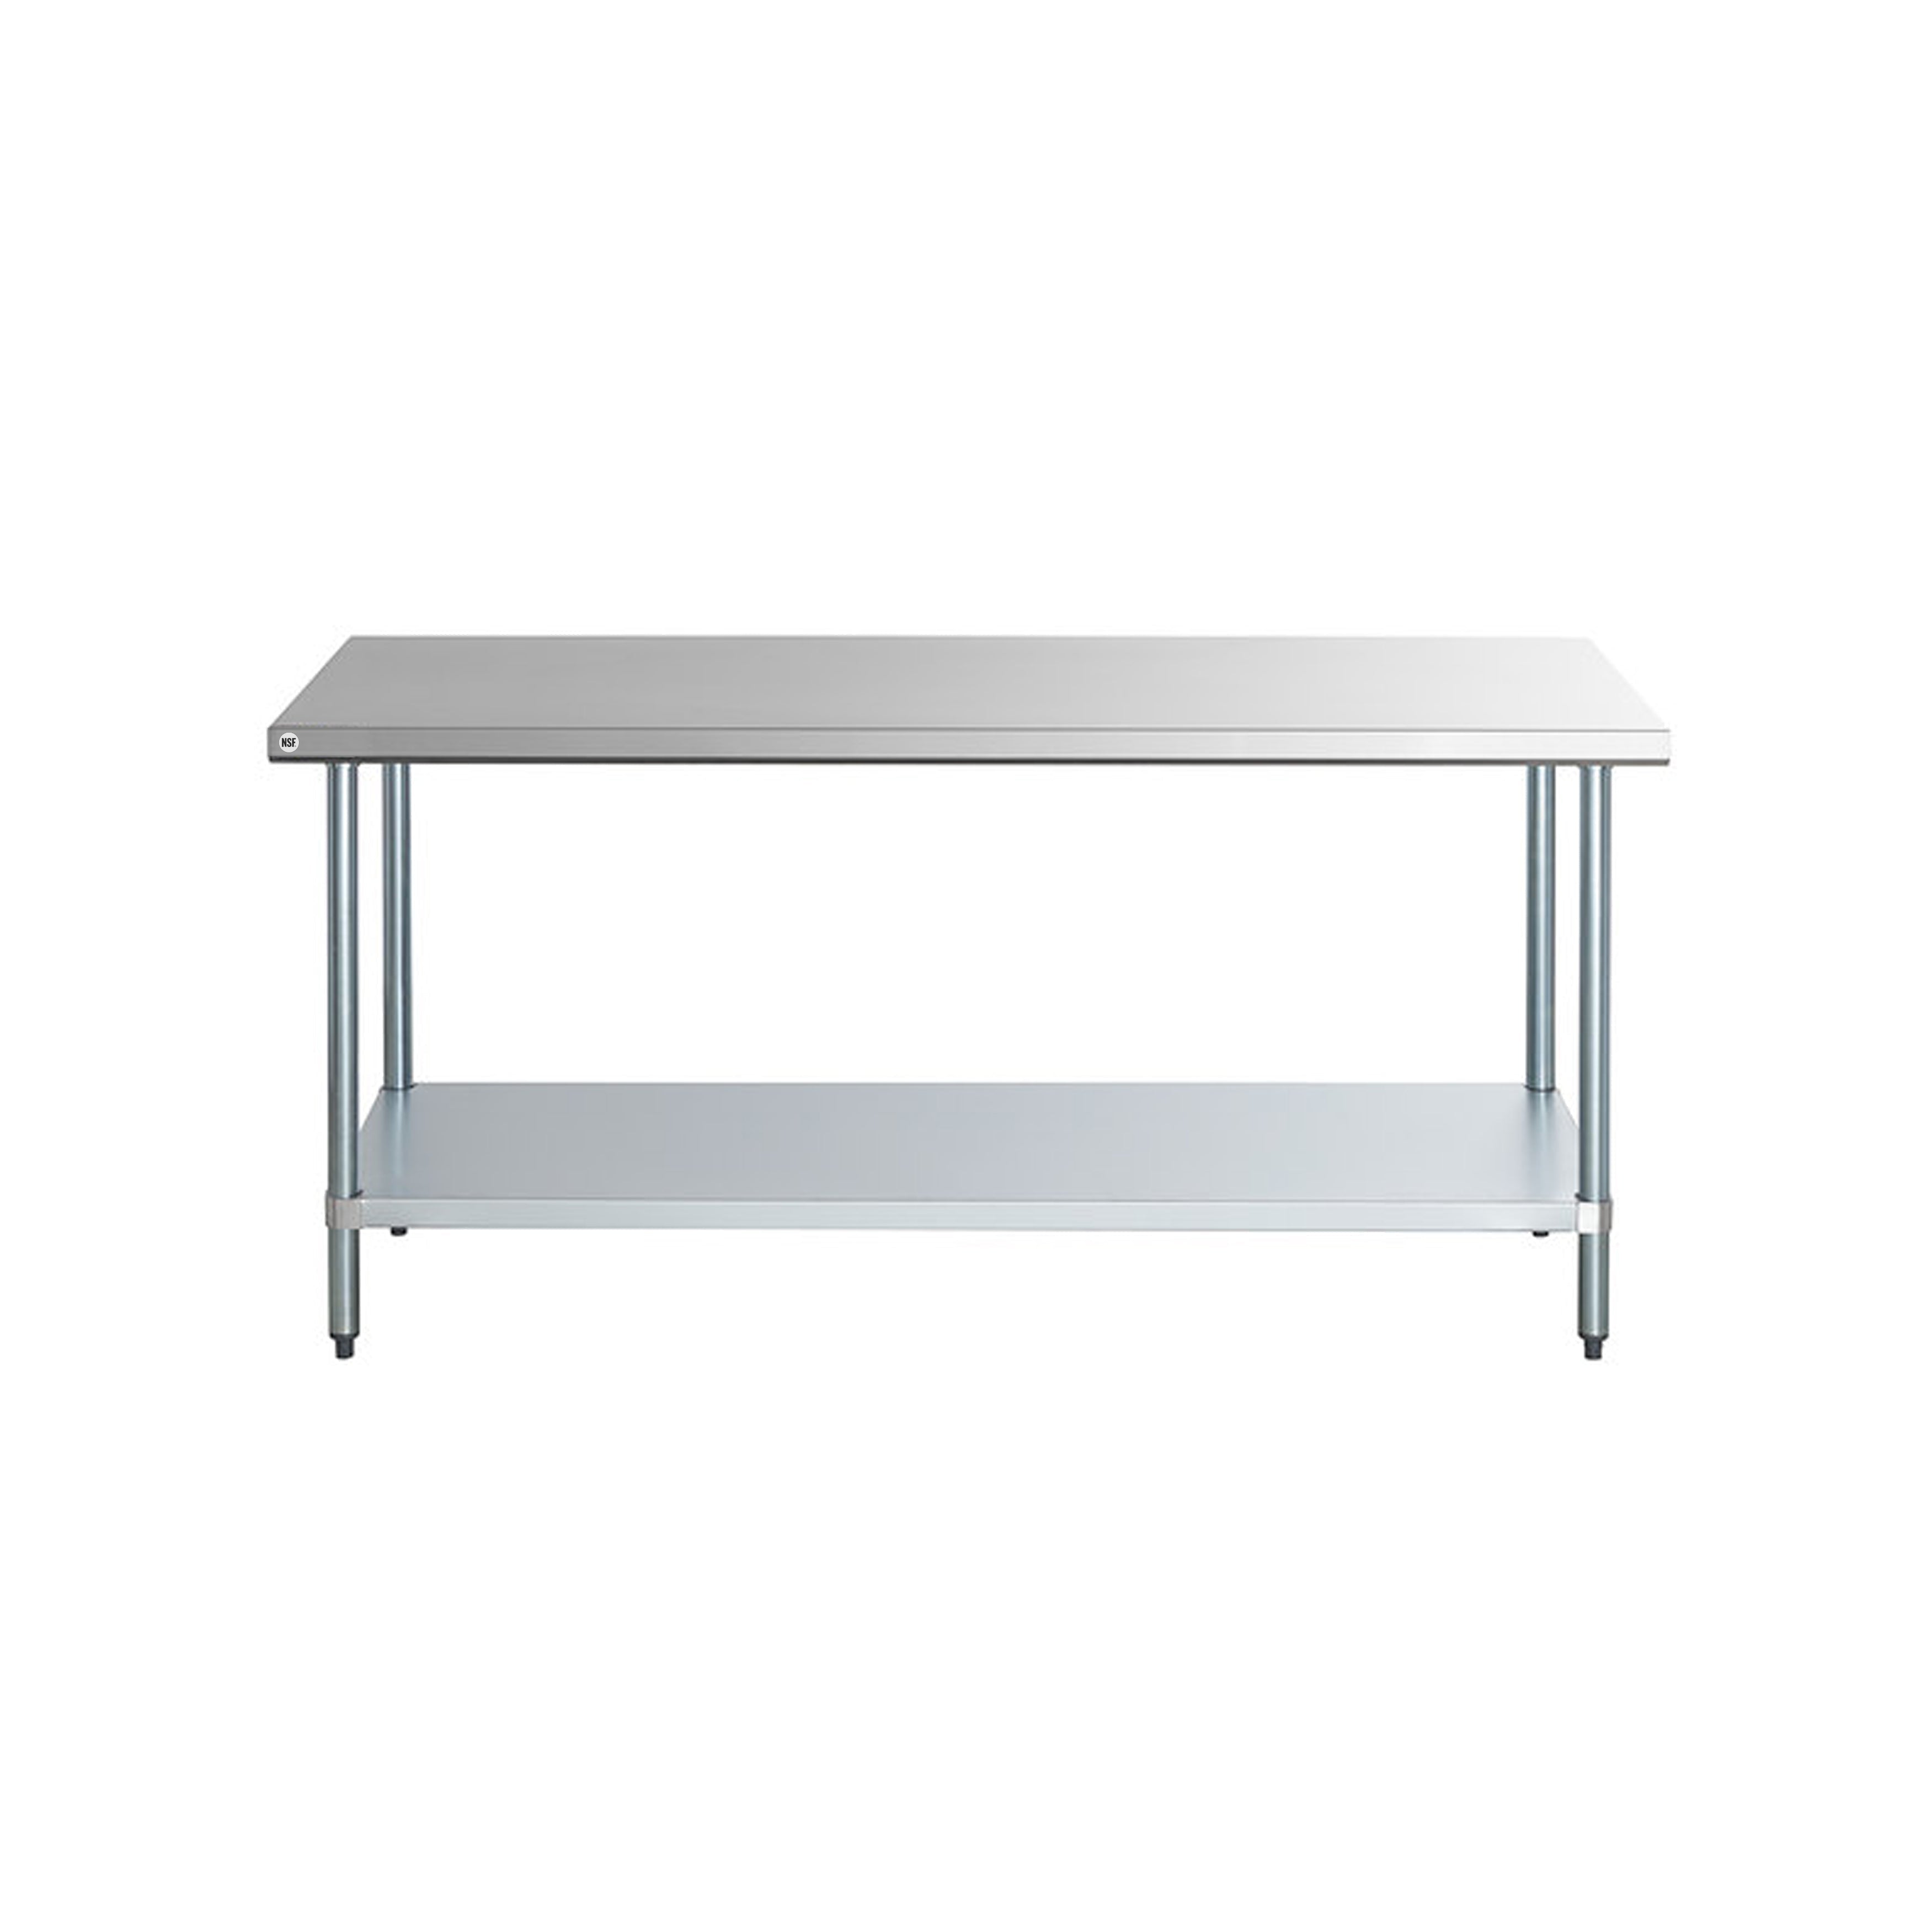 Omcan - 19141, Commercial 24" x 96" Stainless Steel Kitchen Work Table 1600lbs Heavy Duty